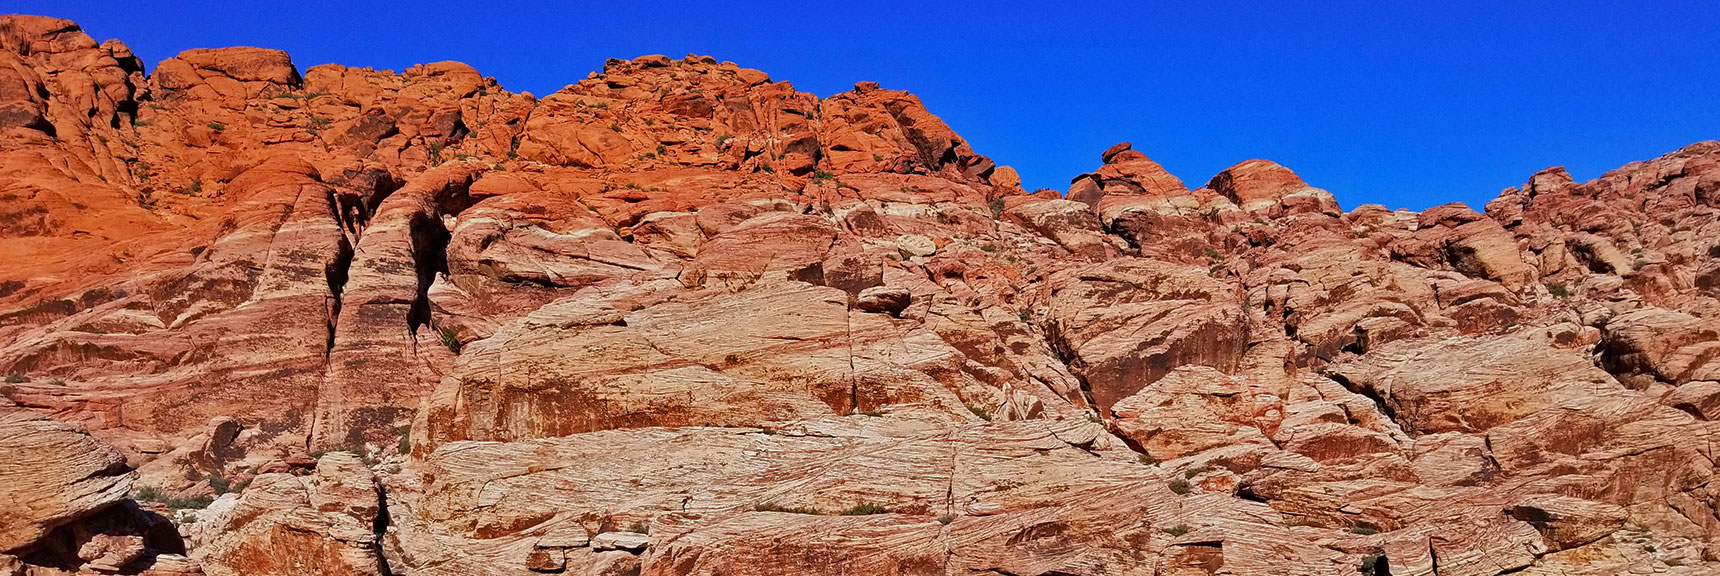 Red Rock National Park View of Calico Hills from Scenic Drive